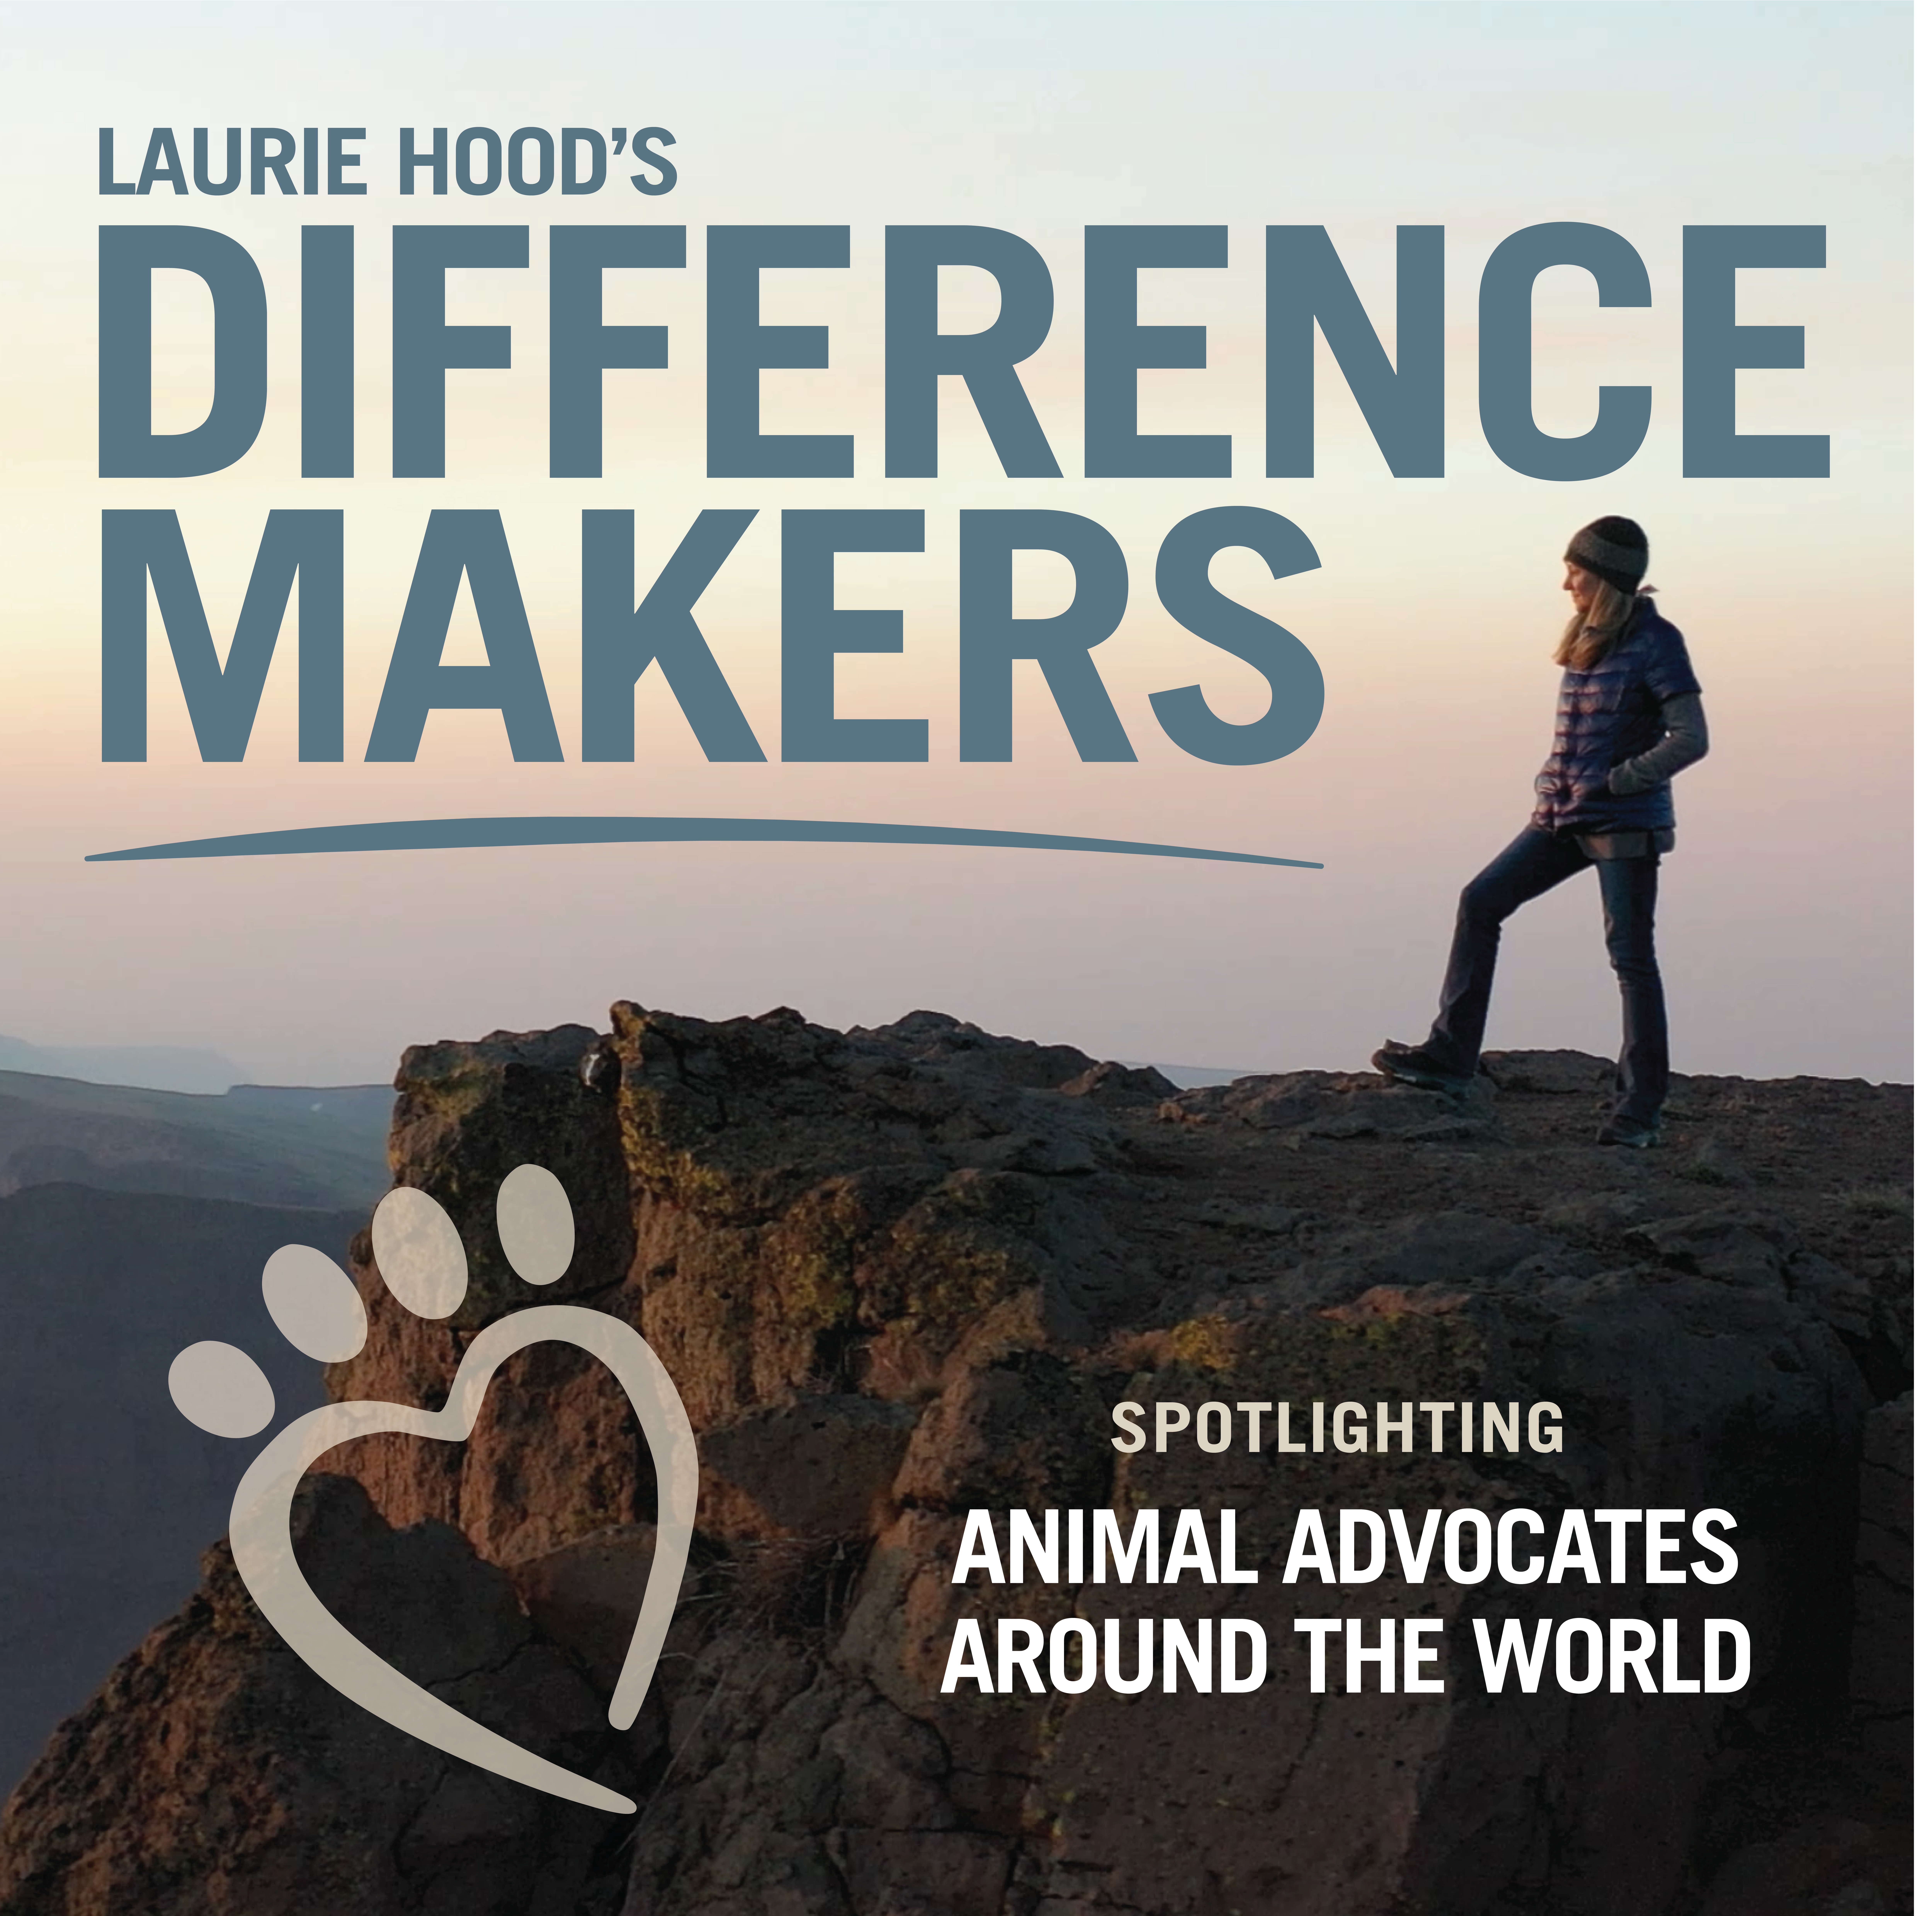 Alaqua Animal Refuge Announces New Episodes  for “Laurie Hood’s Difference Makers” Podcast Series 